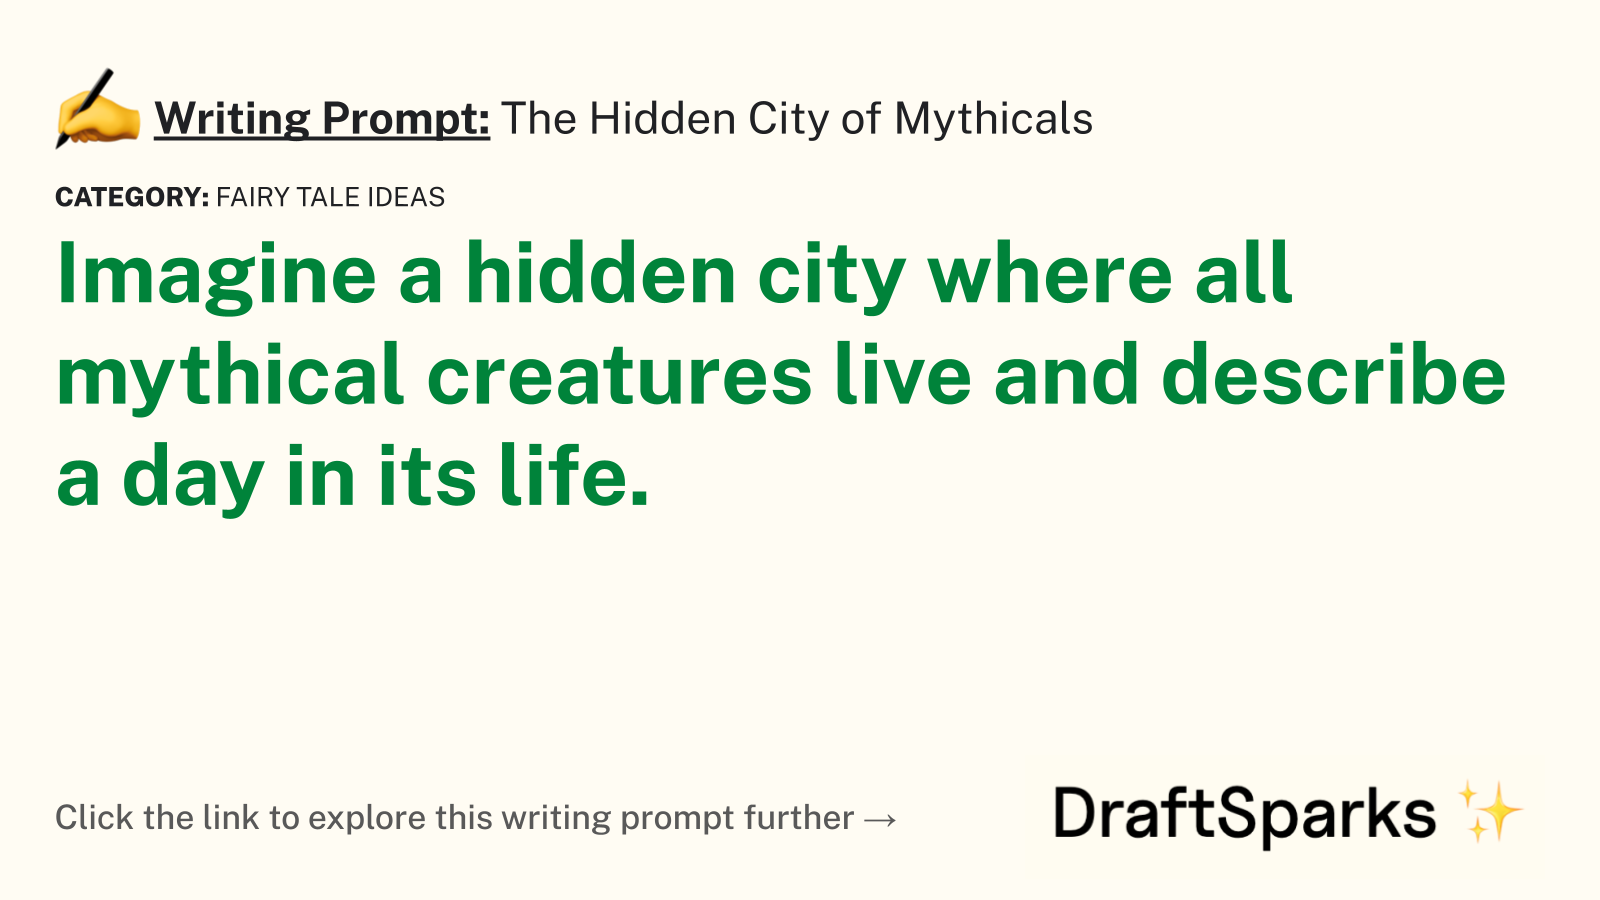 The Hidden City of Mythicals